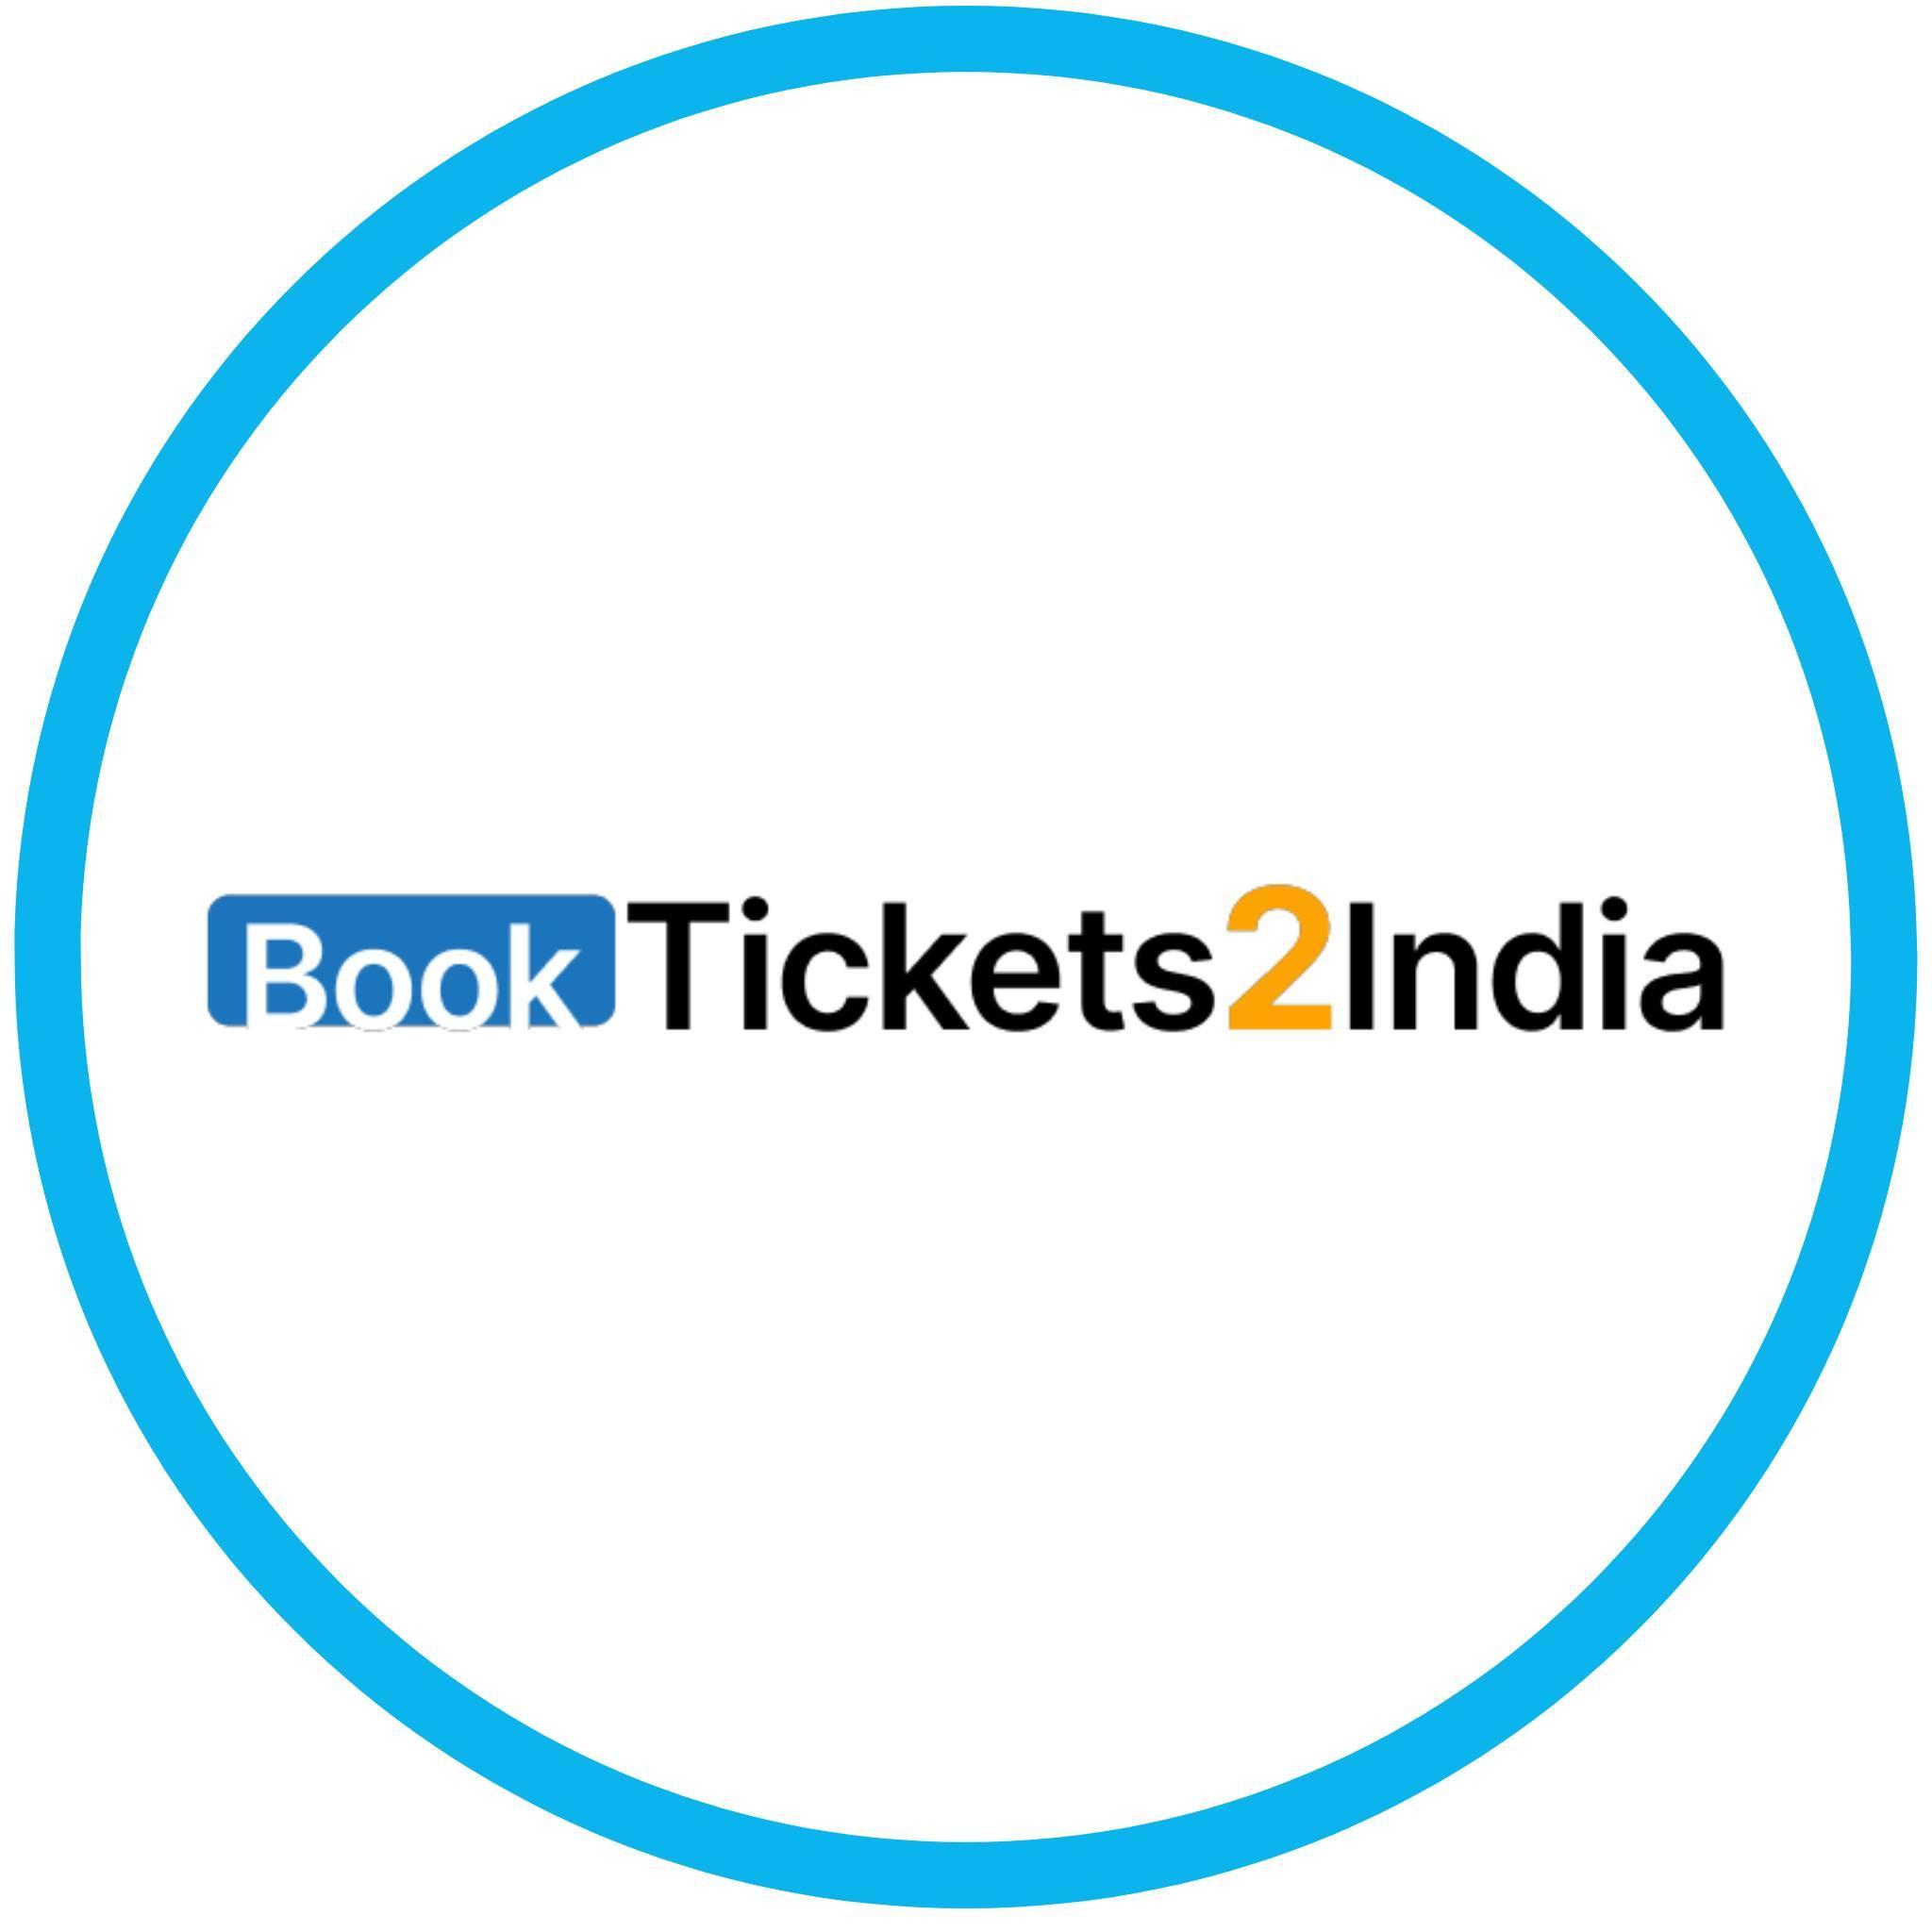 Book Tickets 2 India